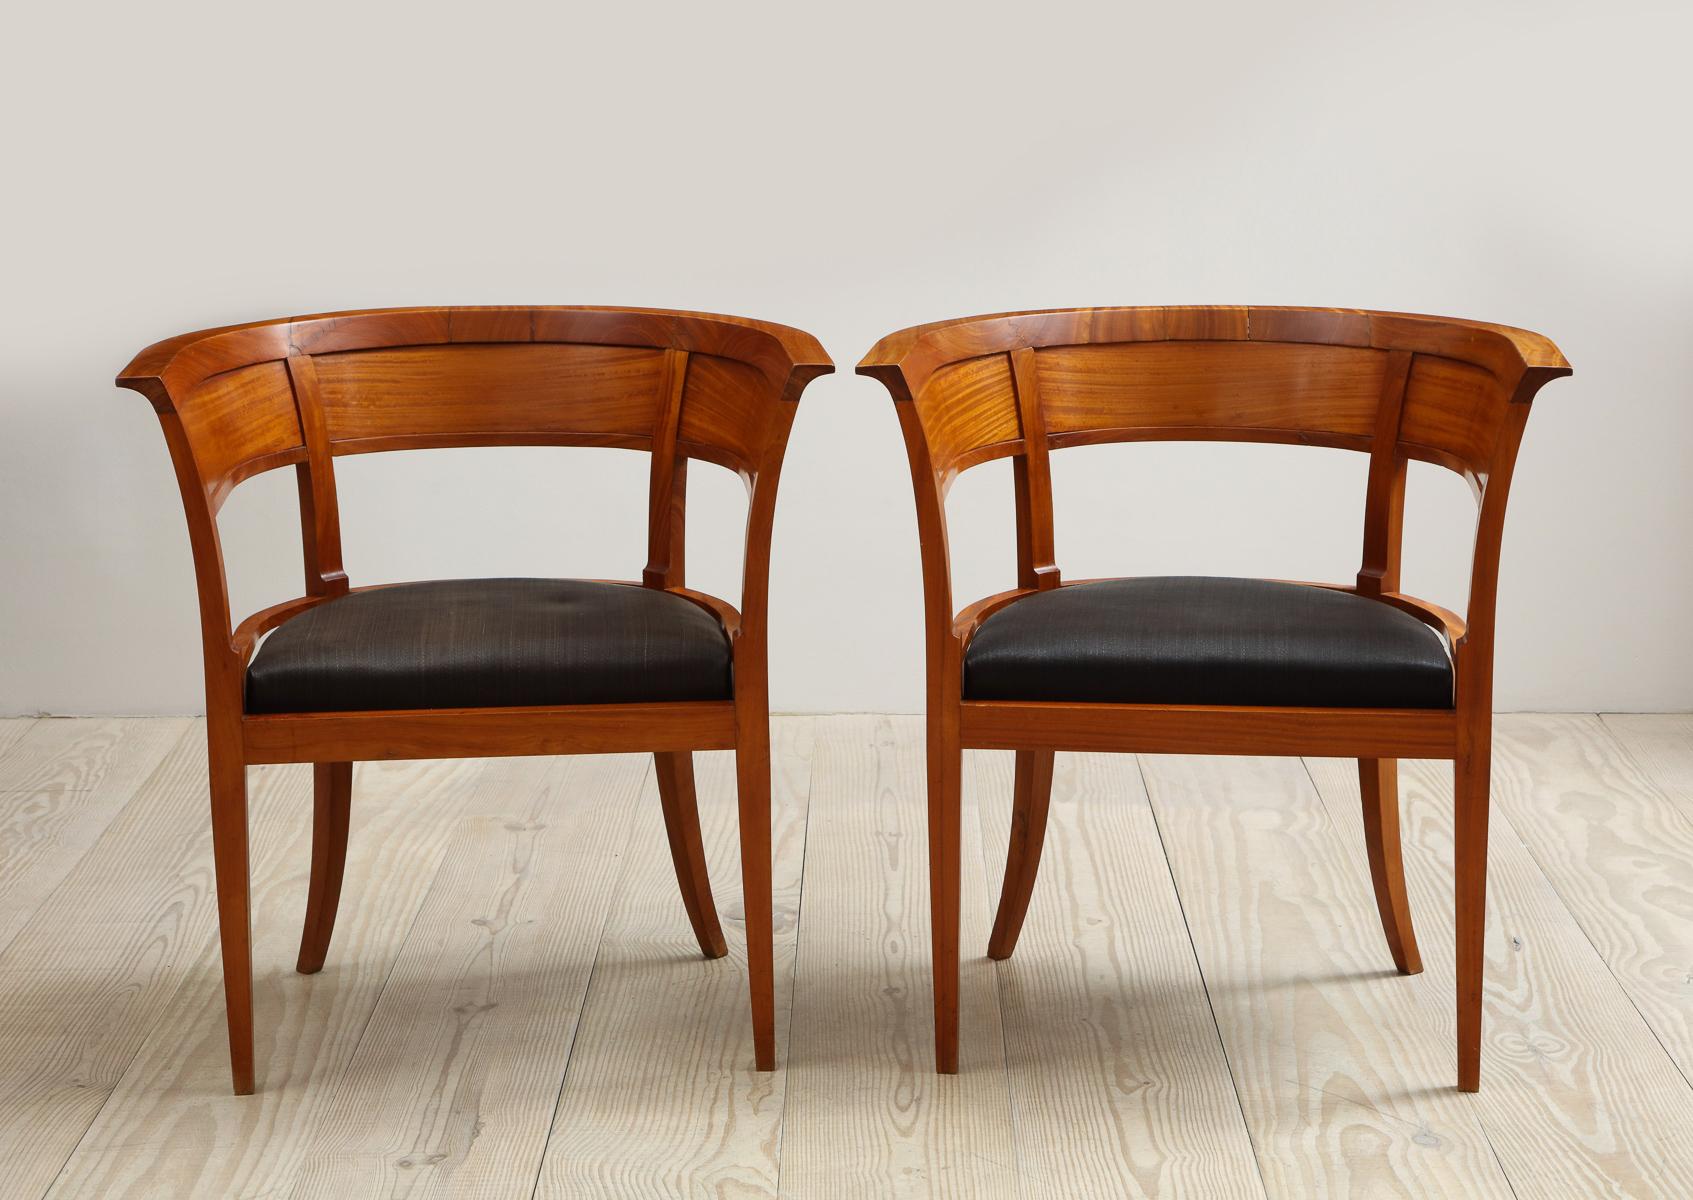 Kaare Klint, Rare Armchairs with Back Wood Panels, 1916 4